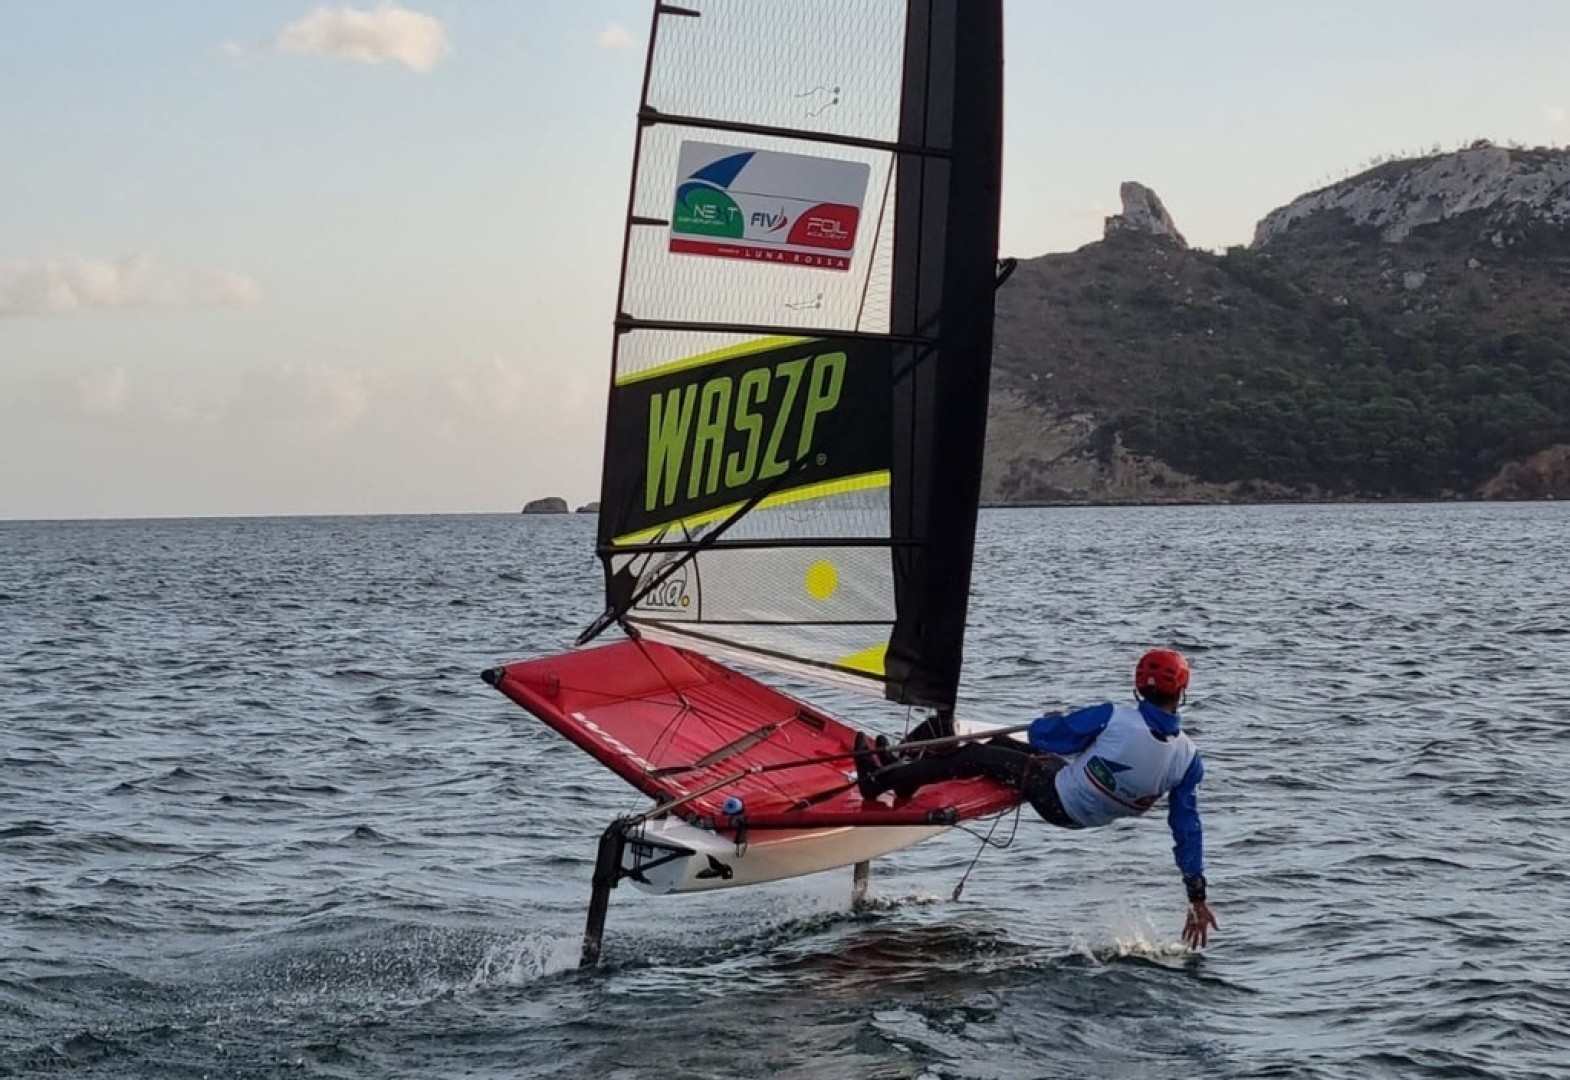 The Next Generation Foil Academy powered by Luna Rossa in Cagliari